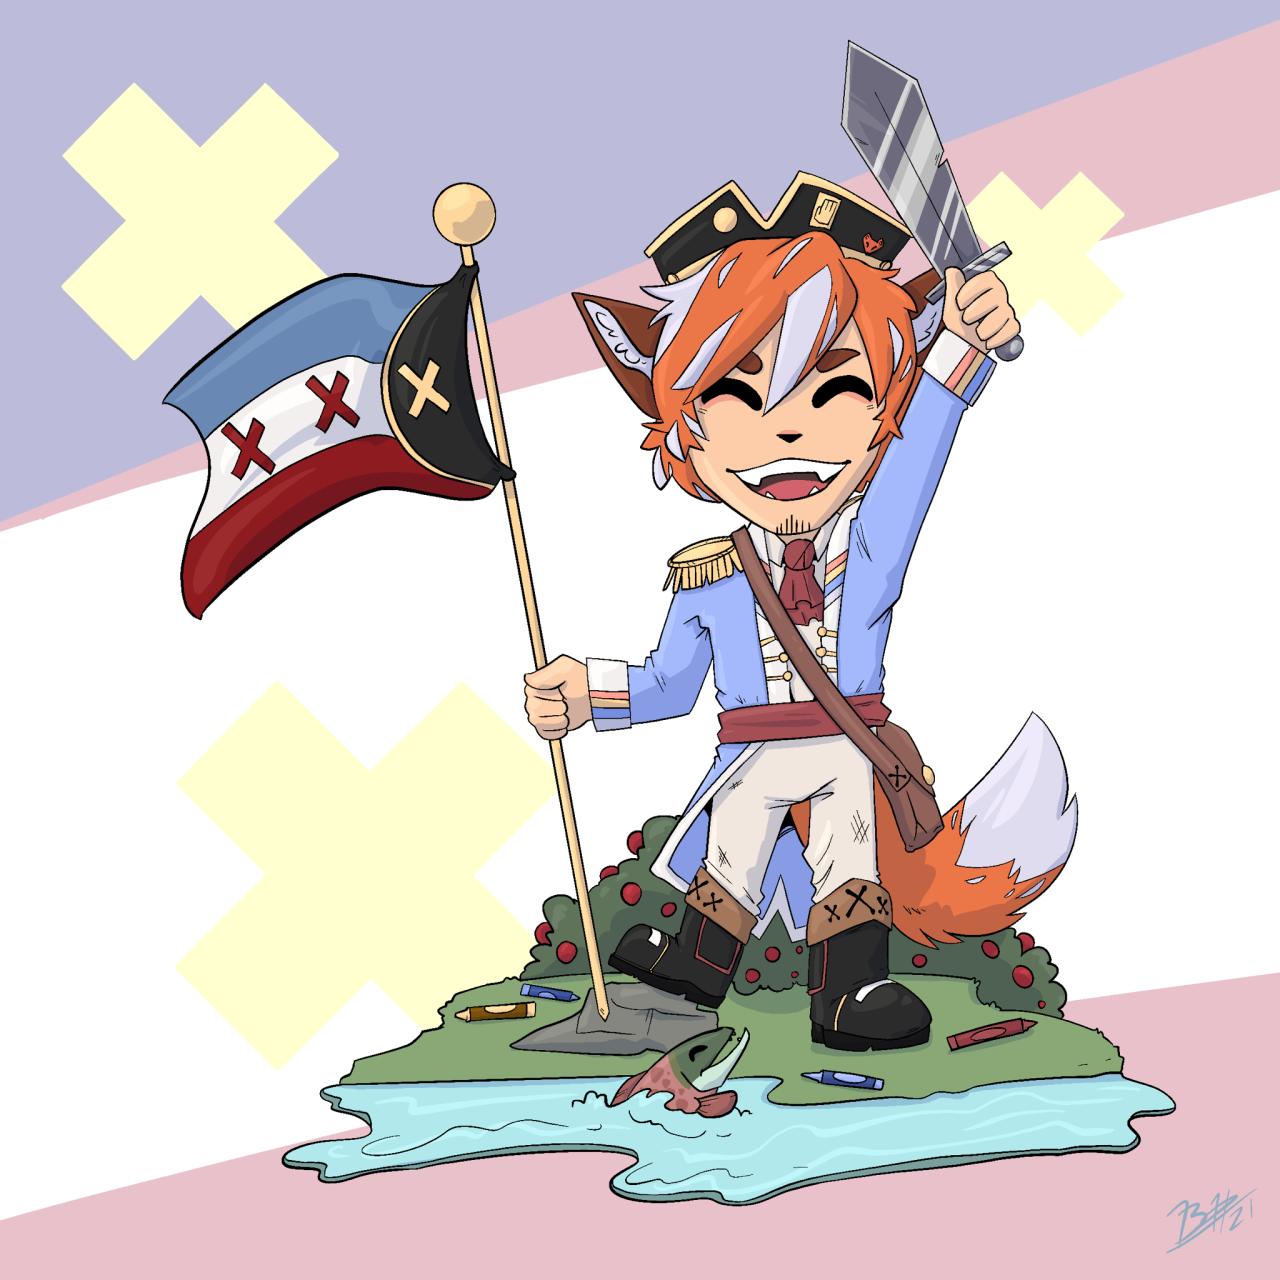 Fundy fanart but I didn't draw the flag